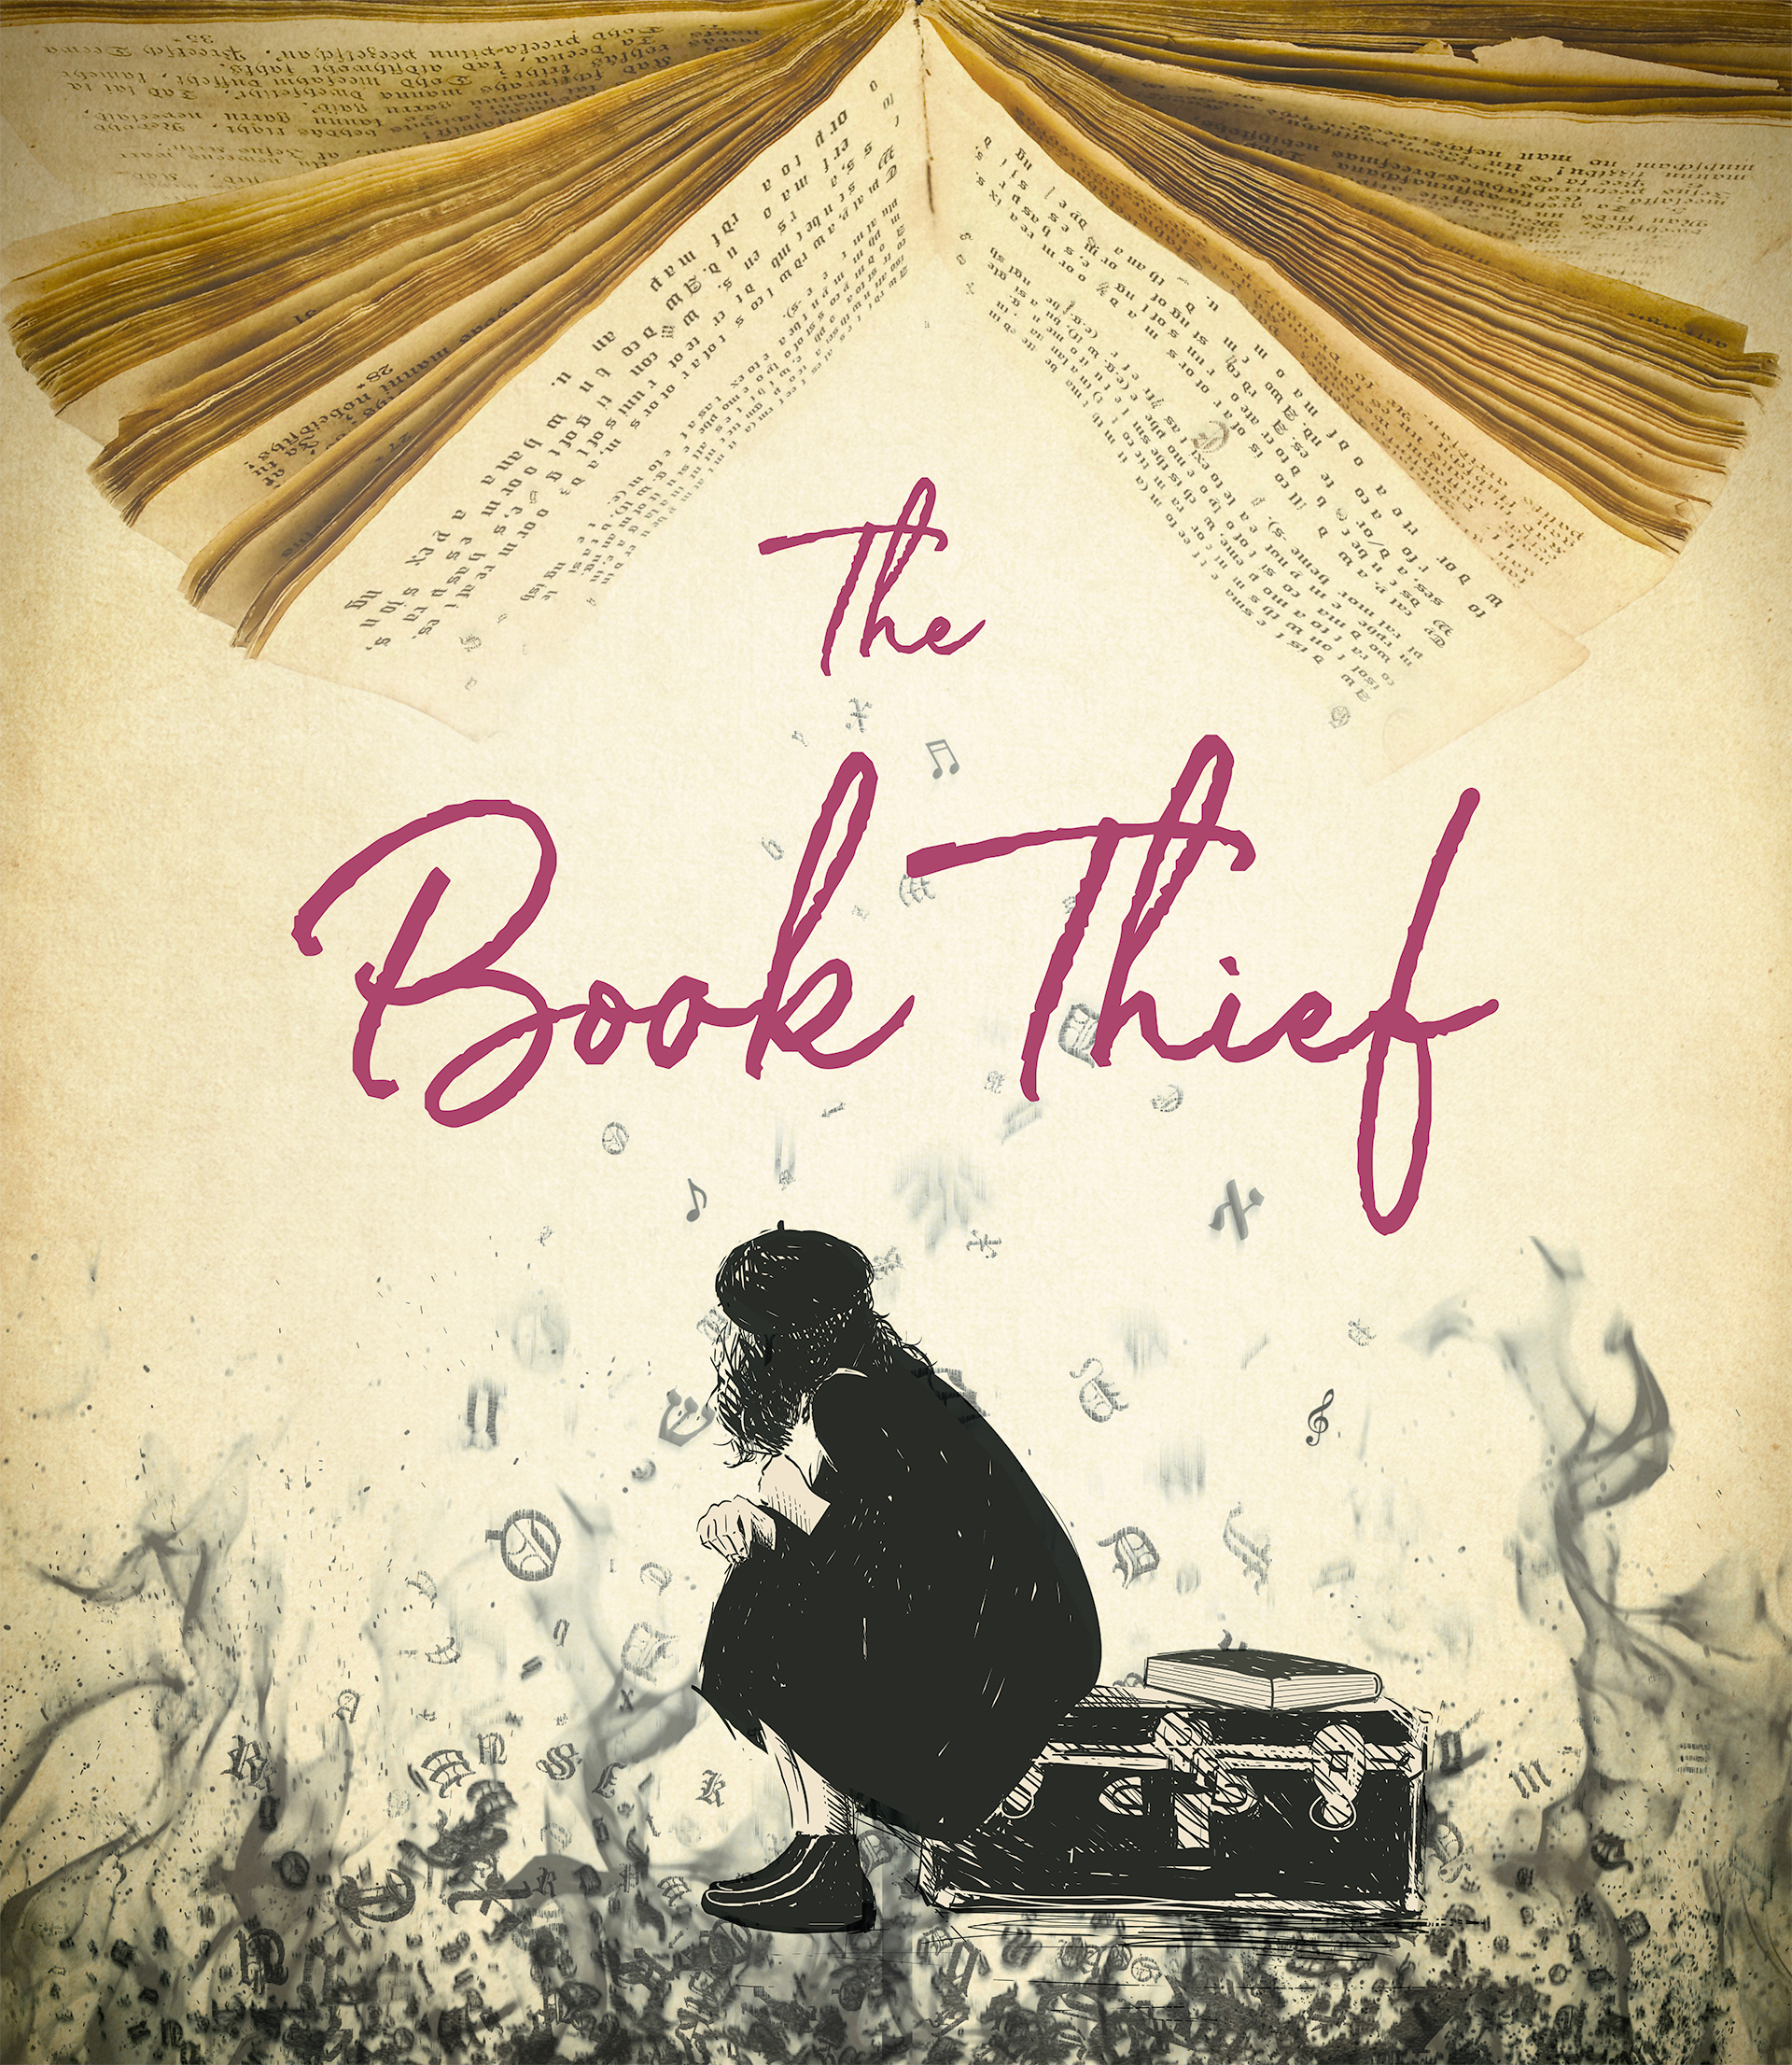 Book Thief opens at Bolton Octagon on September 17